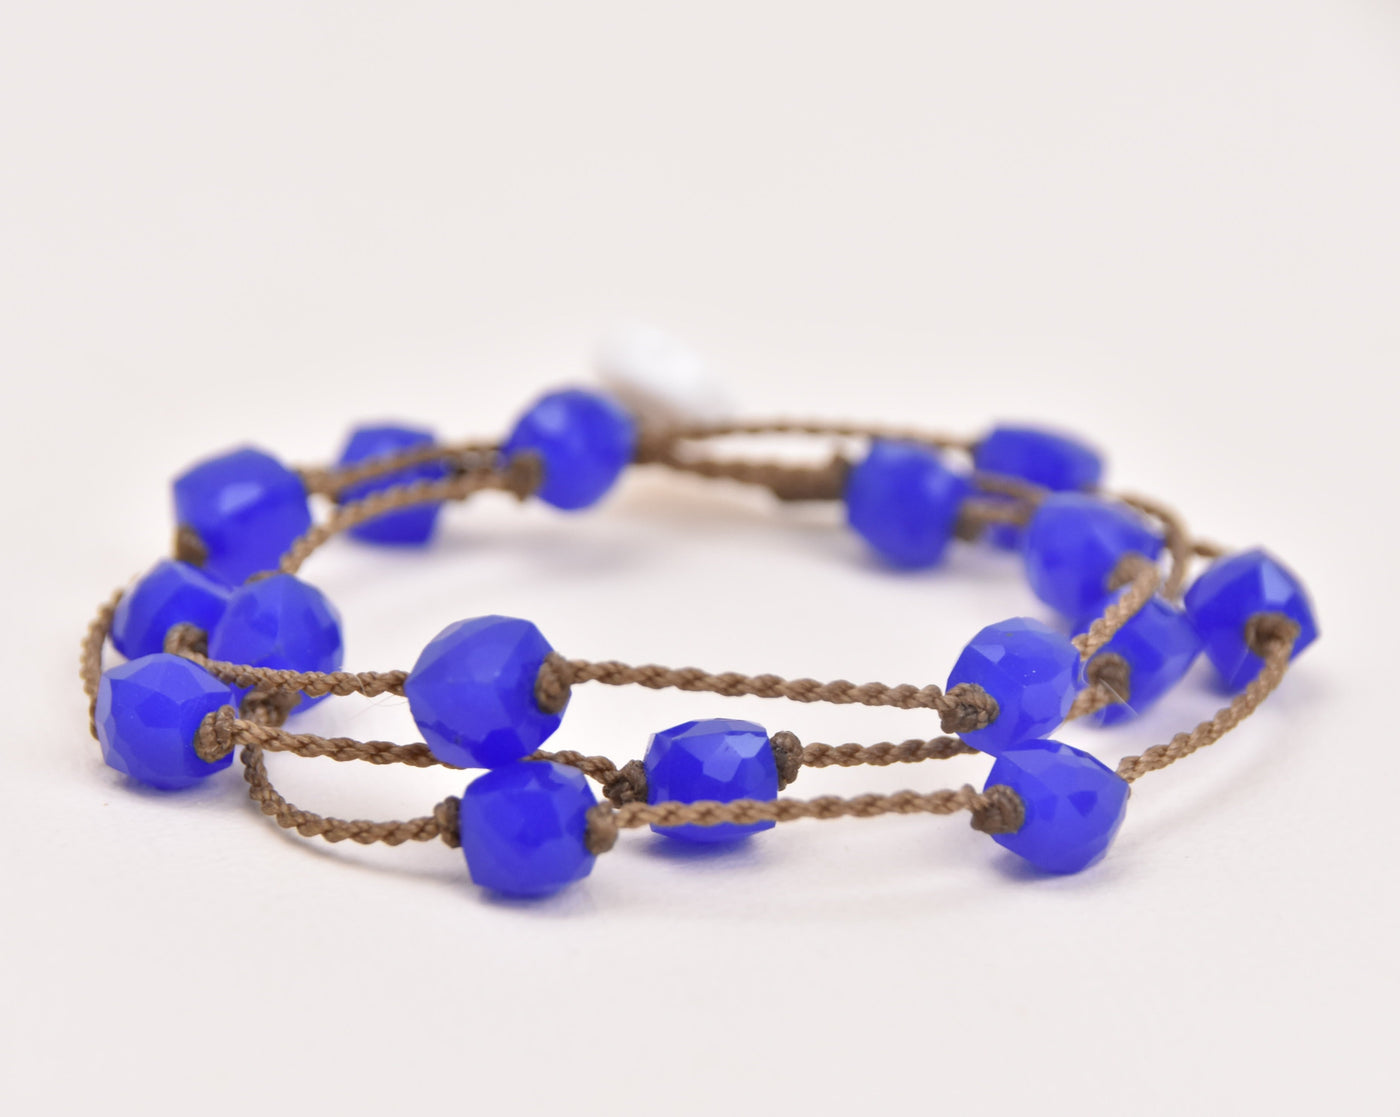 Cobalt Blue Chalcedony WRAP - only 1 available! 22" standard length